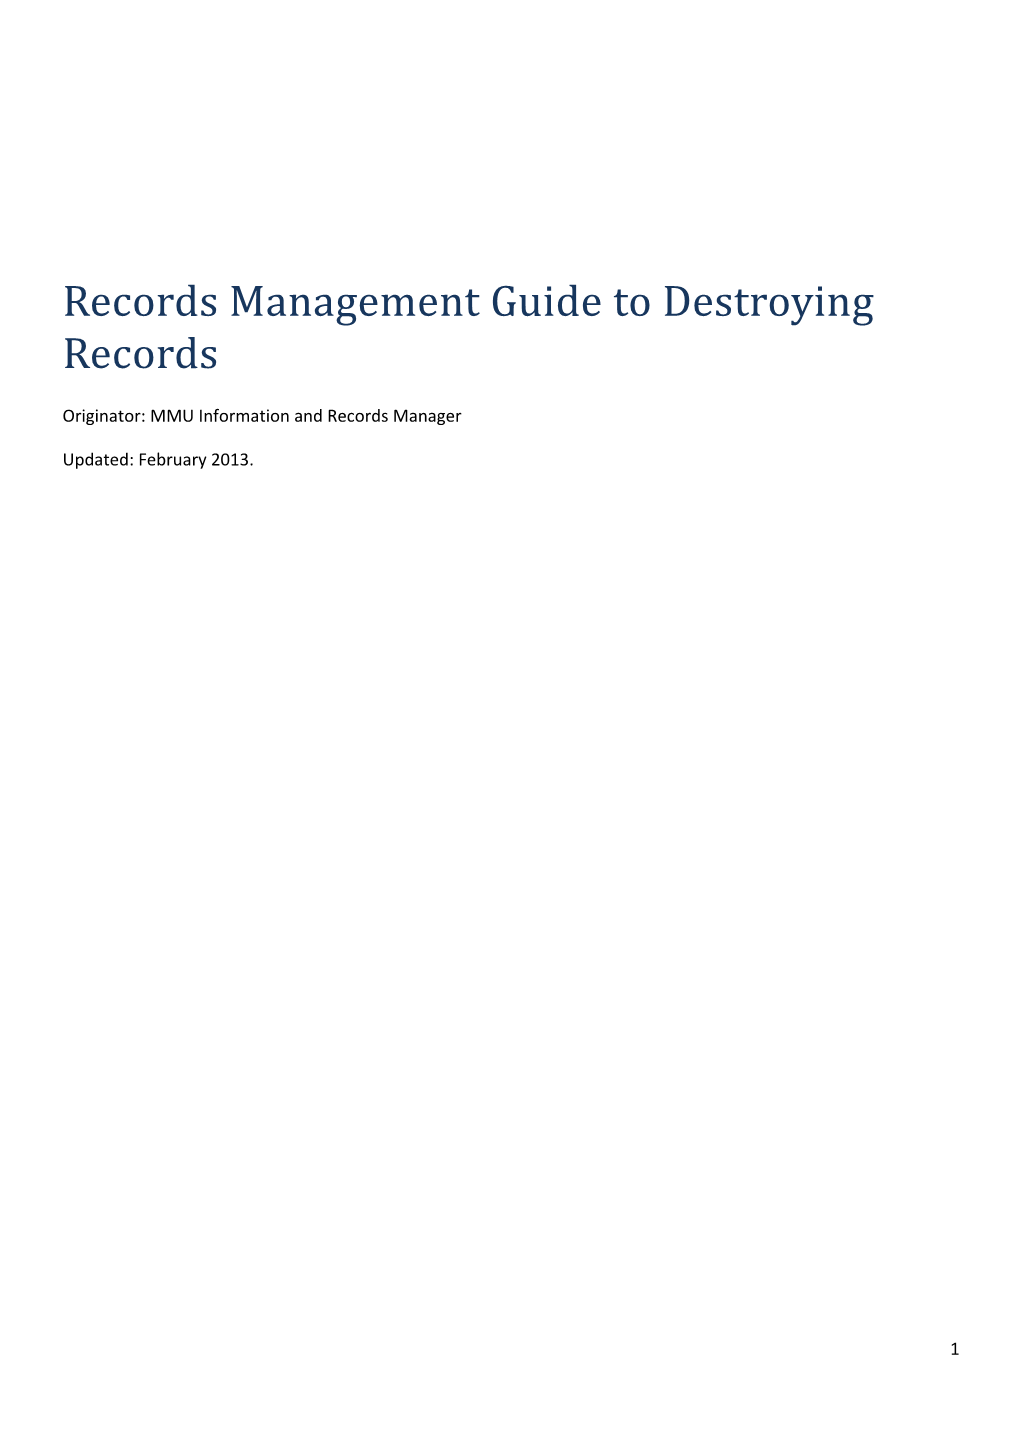 Records Management Guide to Destroying Records